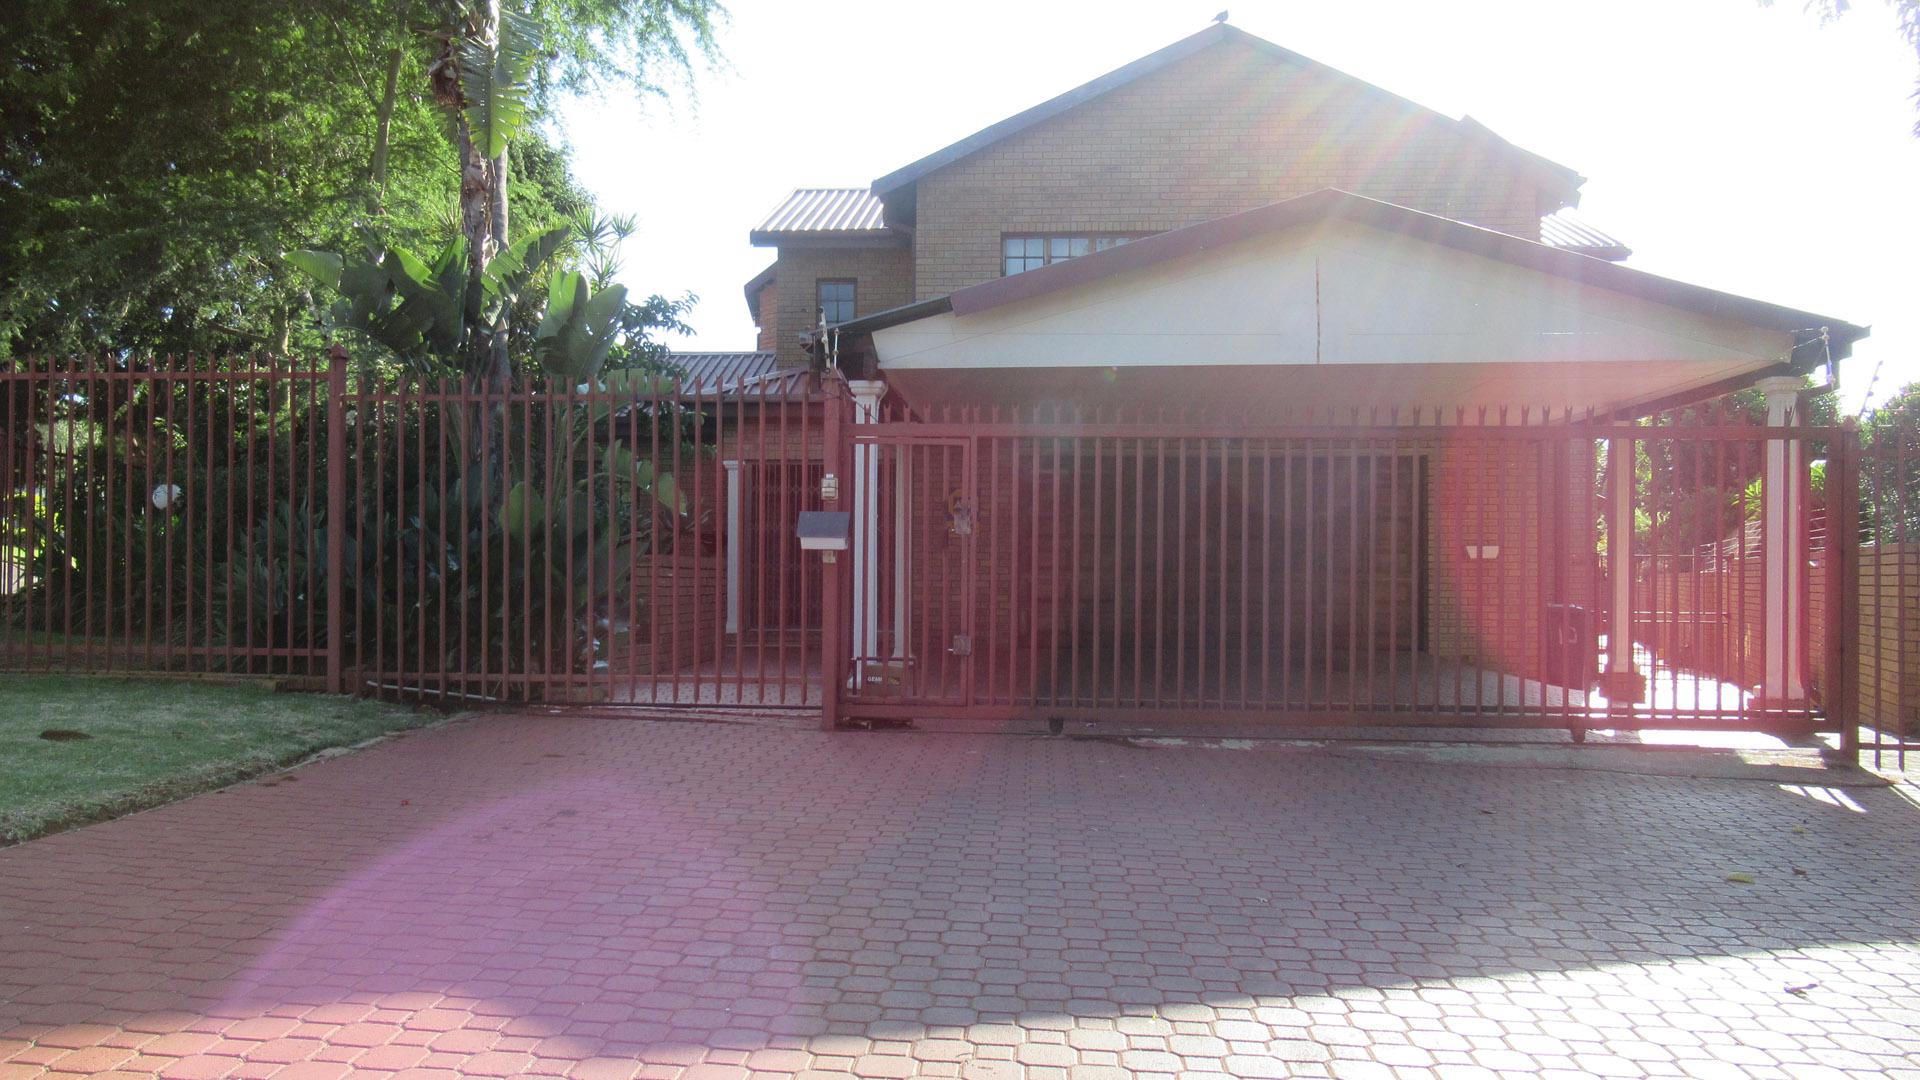 FNB Repossessed Eviction 5 Bedroom House for Sale in Amandas